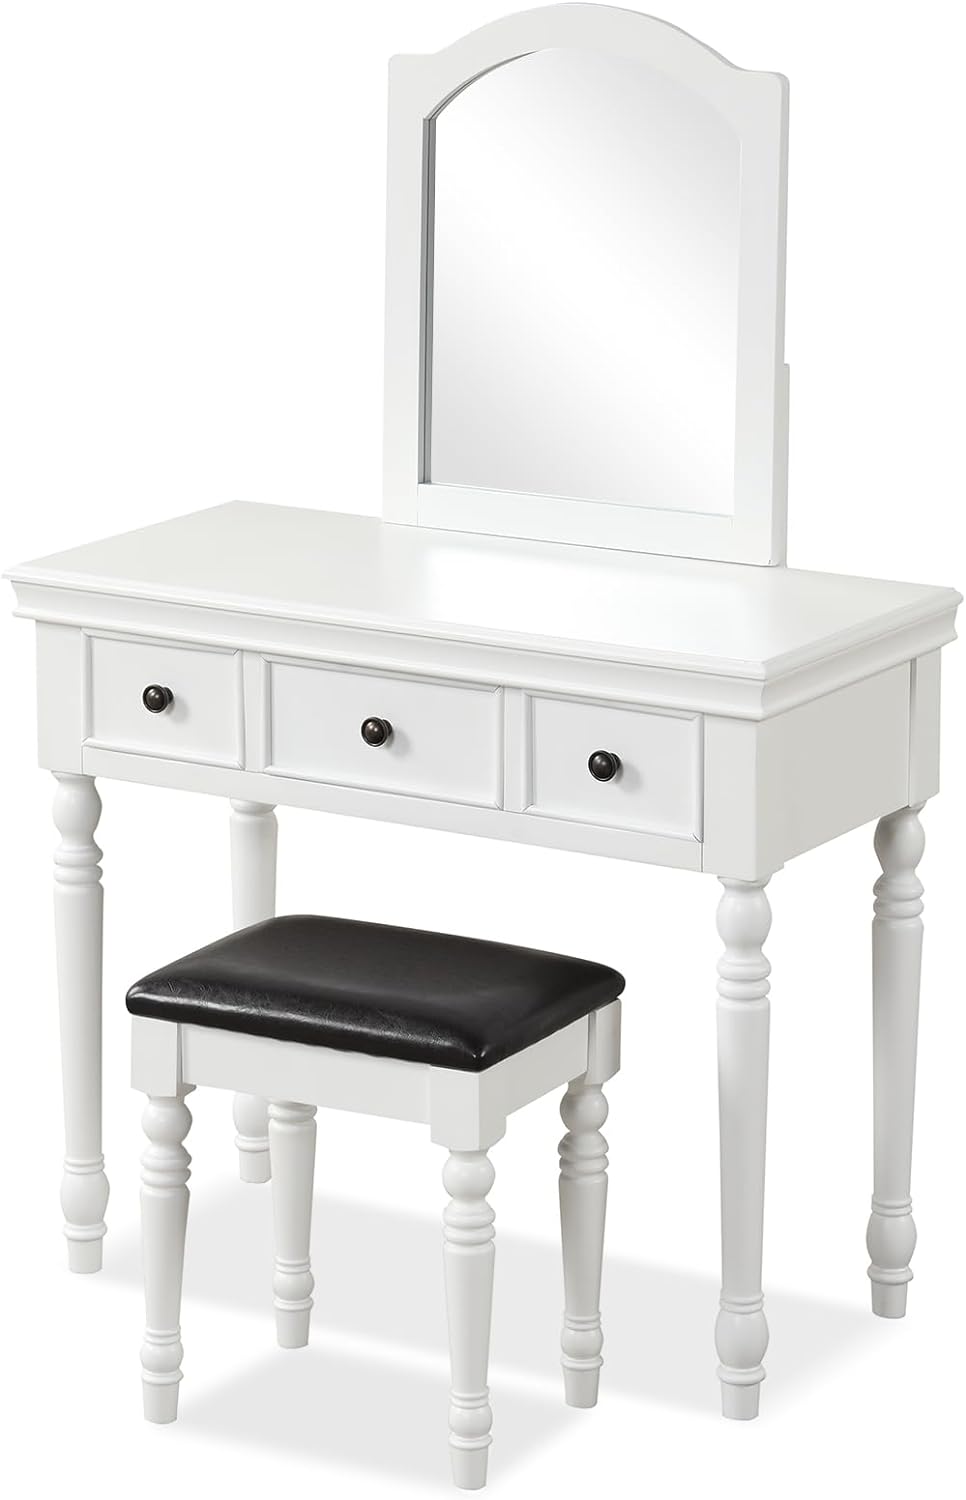 CHARMAID Makeup Vanity Desk with Mirror and Stool, Vanity Table Set with Large Mirror, 3 Drawers, Cushioned Stool